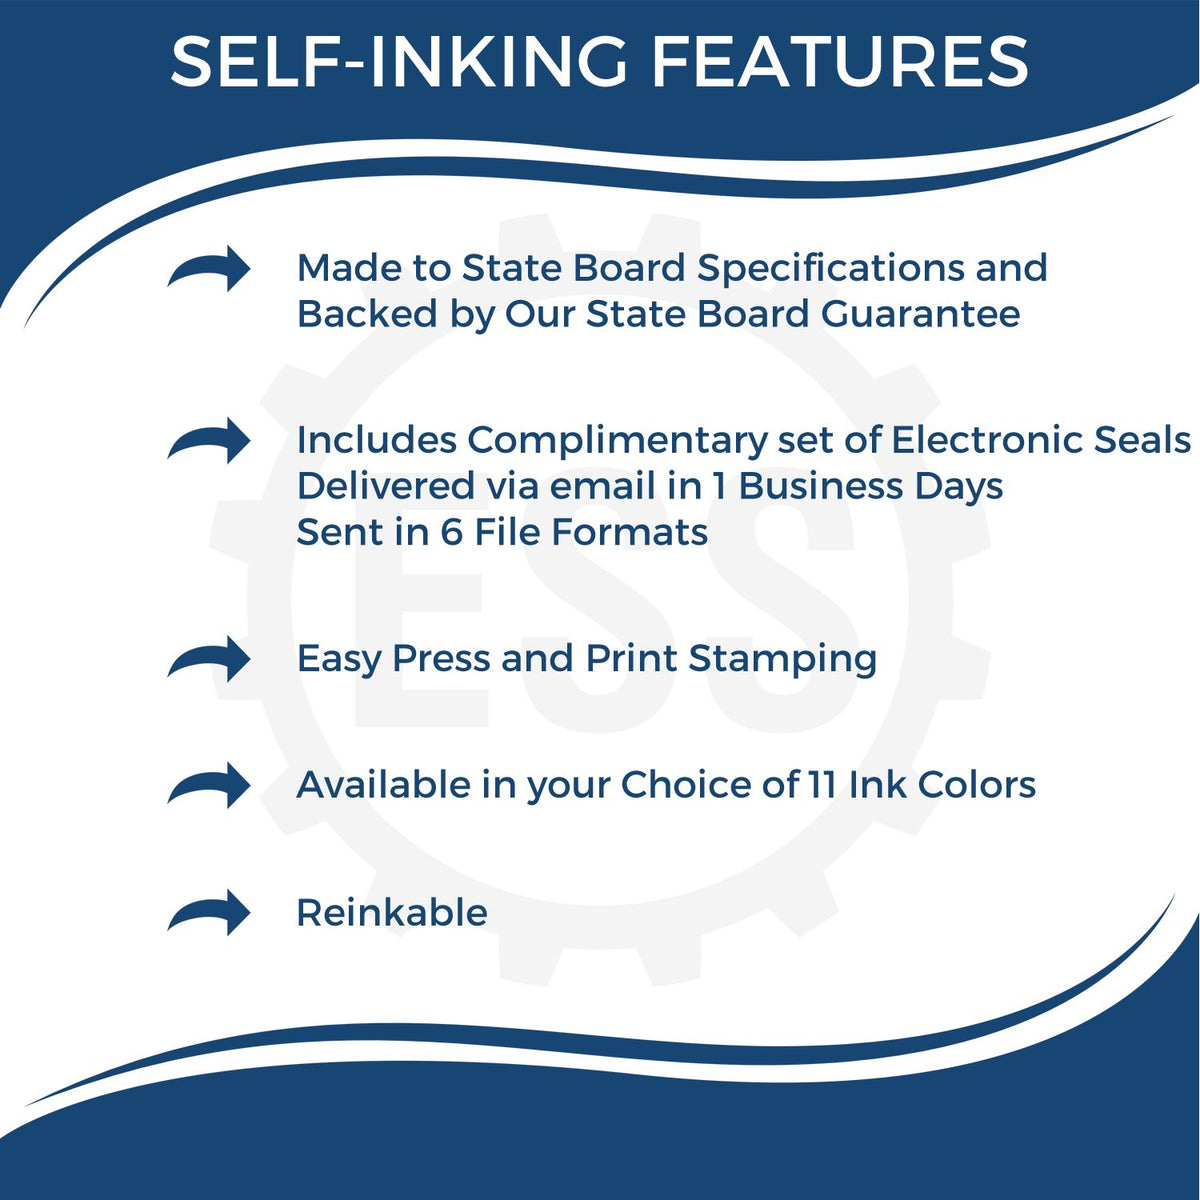 A picture of an infographic highlighting the selling points for the Self-Inking Rectangular Guam Notary Stamp